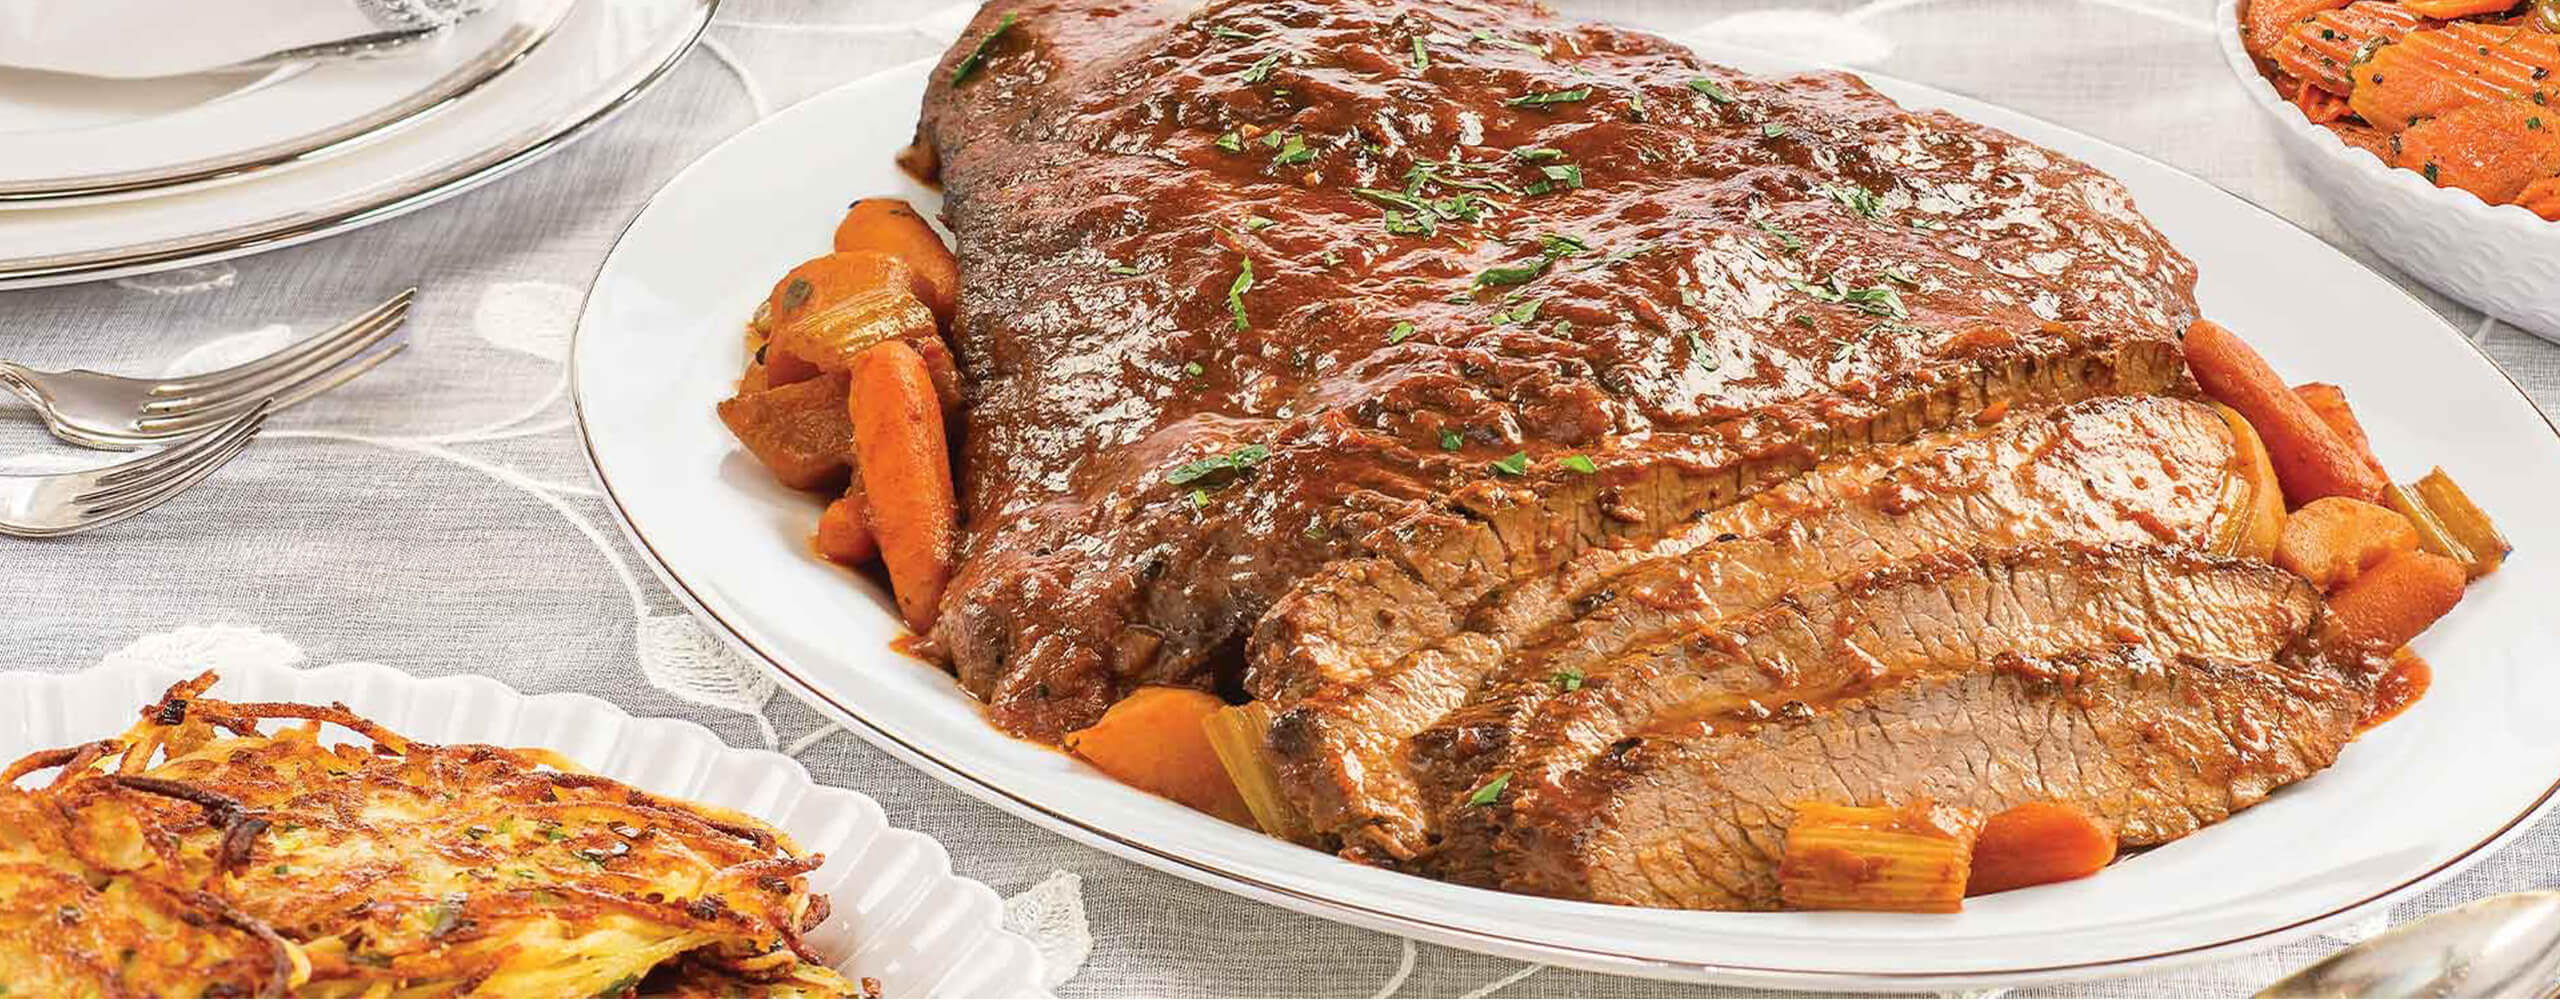 Prepare a delicious Beef Brisket Dinner for your Hanukkah celebration, complete with latkes, matzo ball soup, and more.